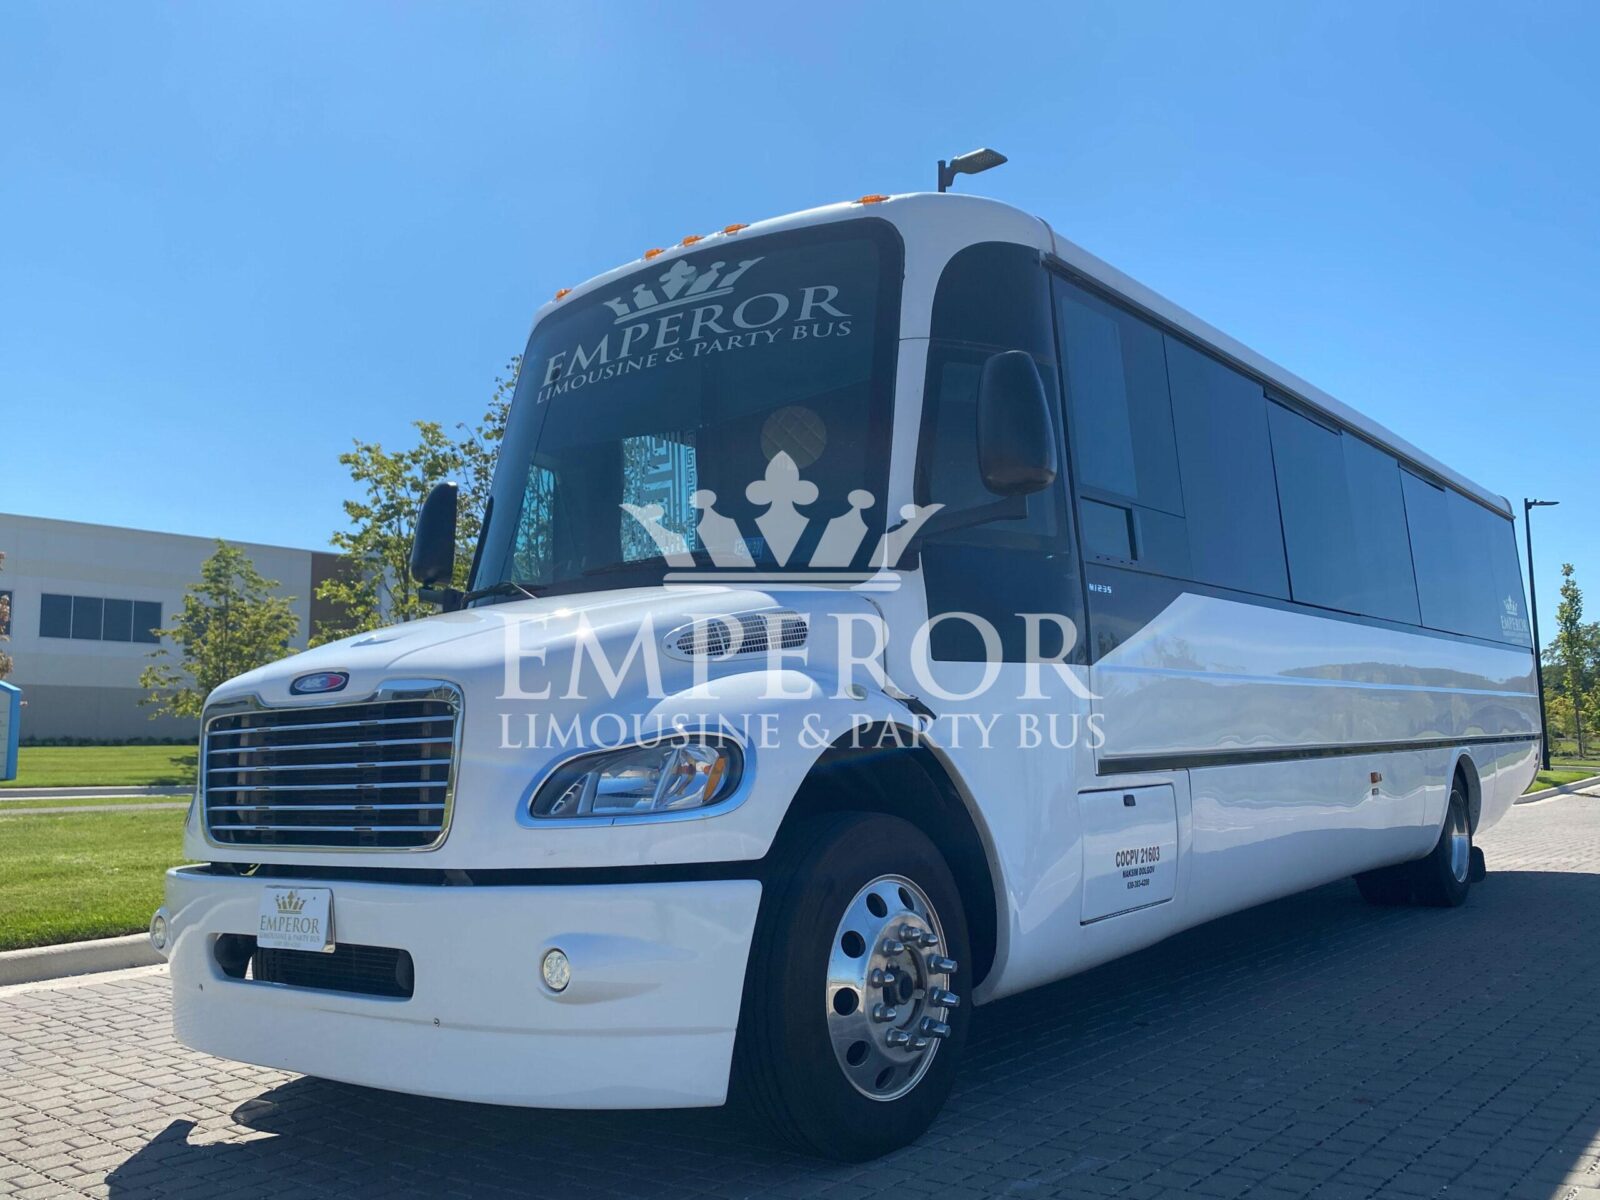 Party bus rental service in Downers Grove